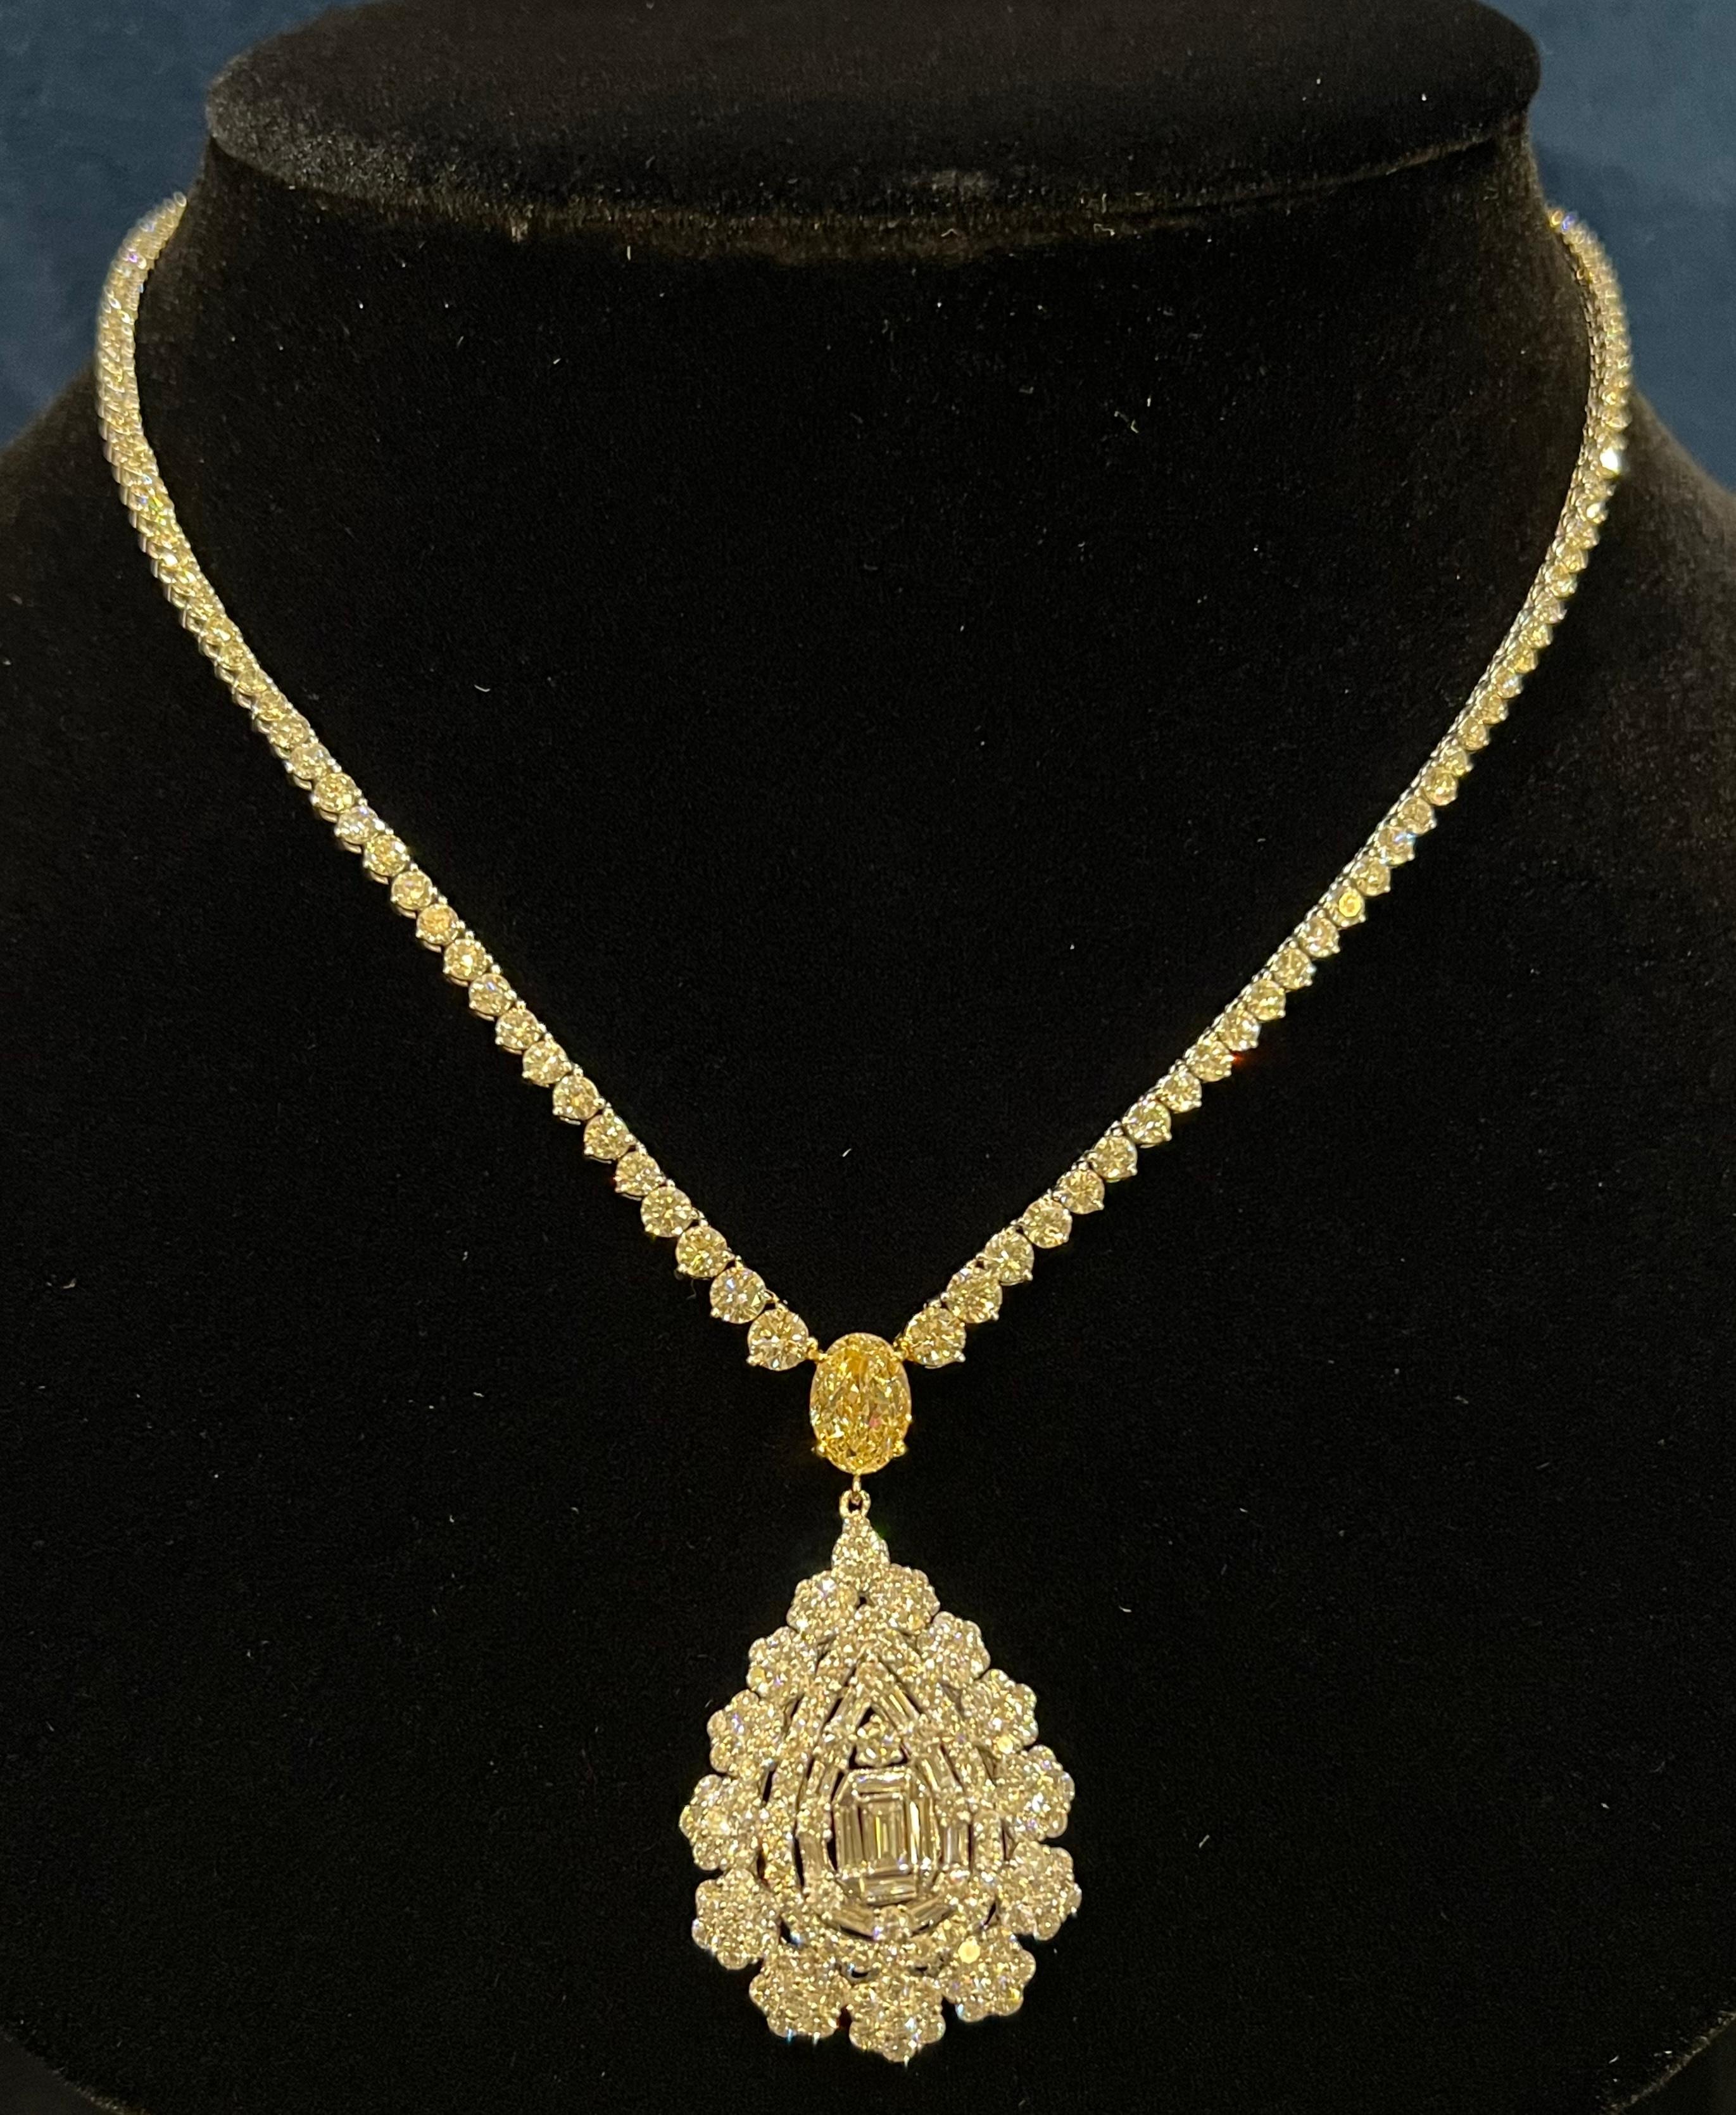  17.69 Carat Diamond Necklace with Fancy Yellow Oval Diamond and Pear Cluster